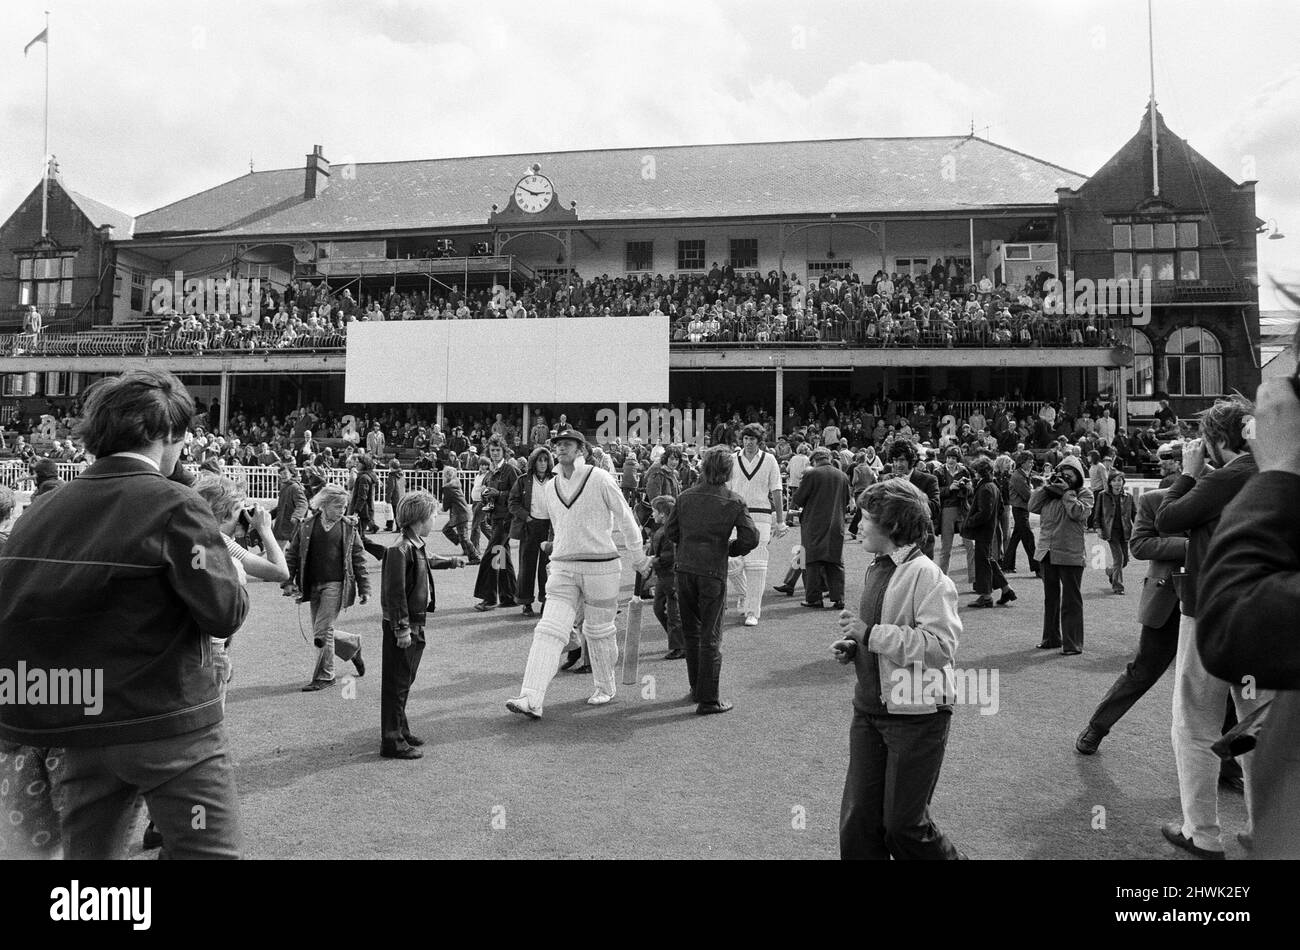 The final first class match to be held at Bramall Lane, Sheffield, the County Championship match between home team Yorkshire and Lancashire. Yorkshire batsman Geoffrey Boycott on the field as crowds rush on.  7th August 1973. Stock Photo